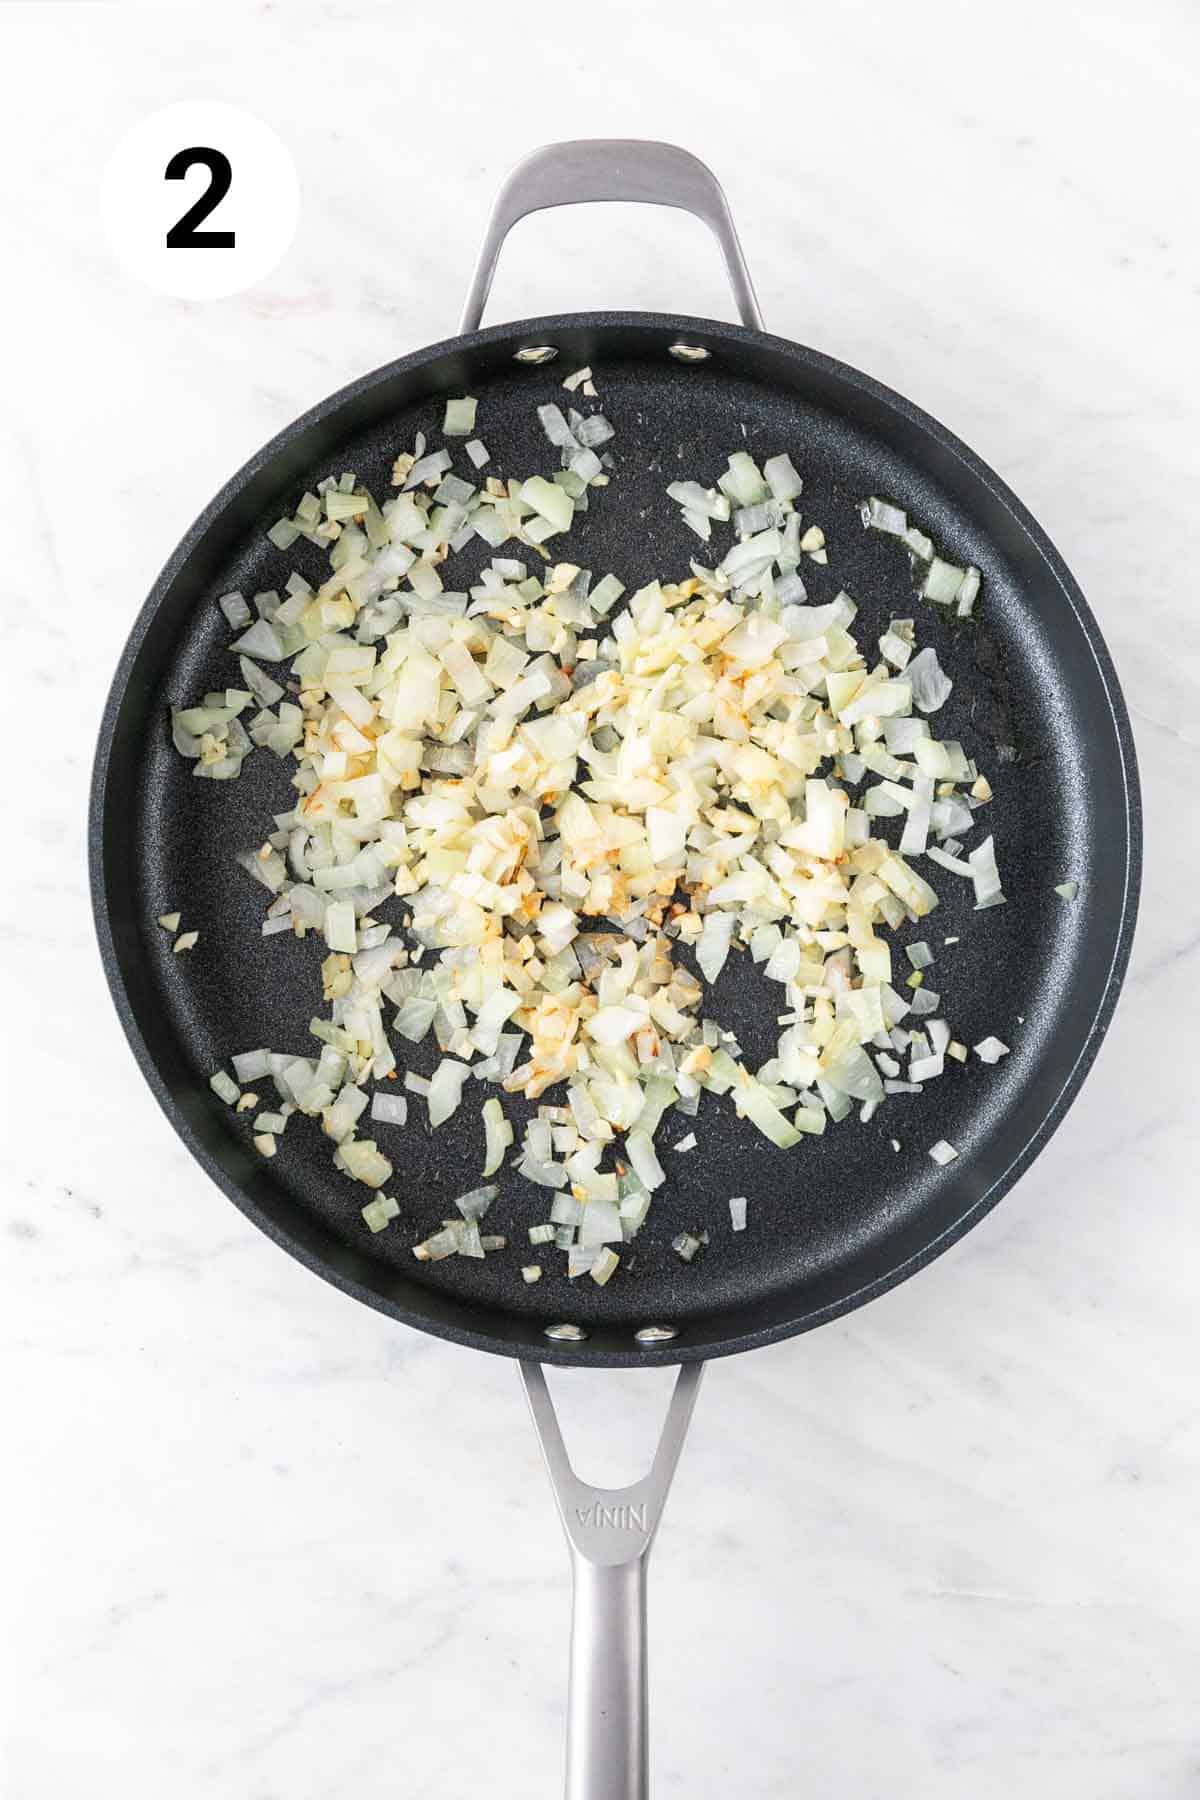 Onion and garlic sautéed in a skillet.